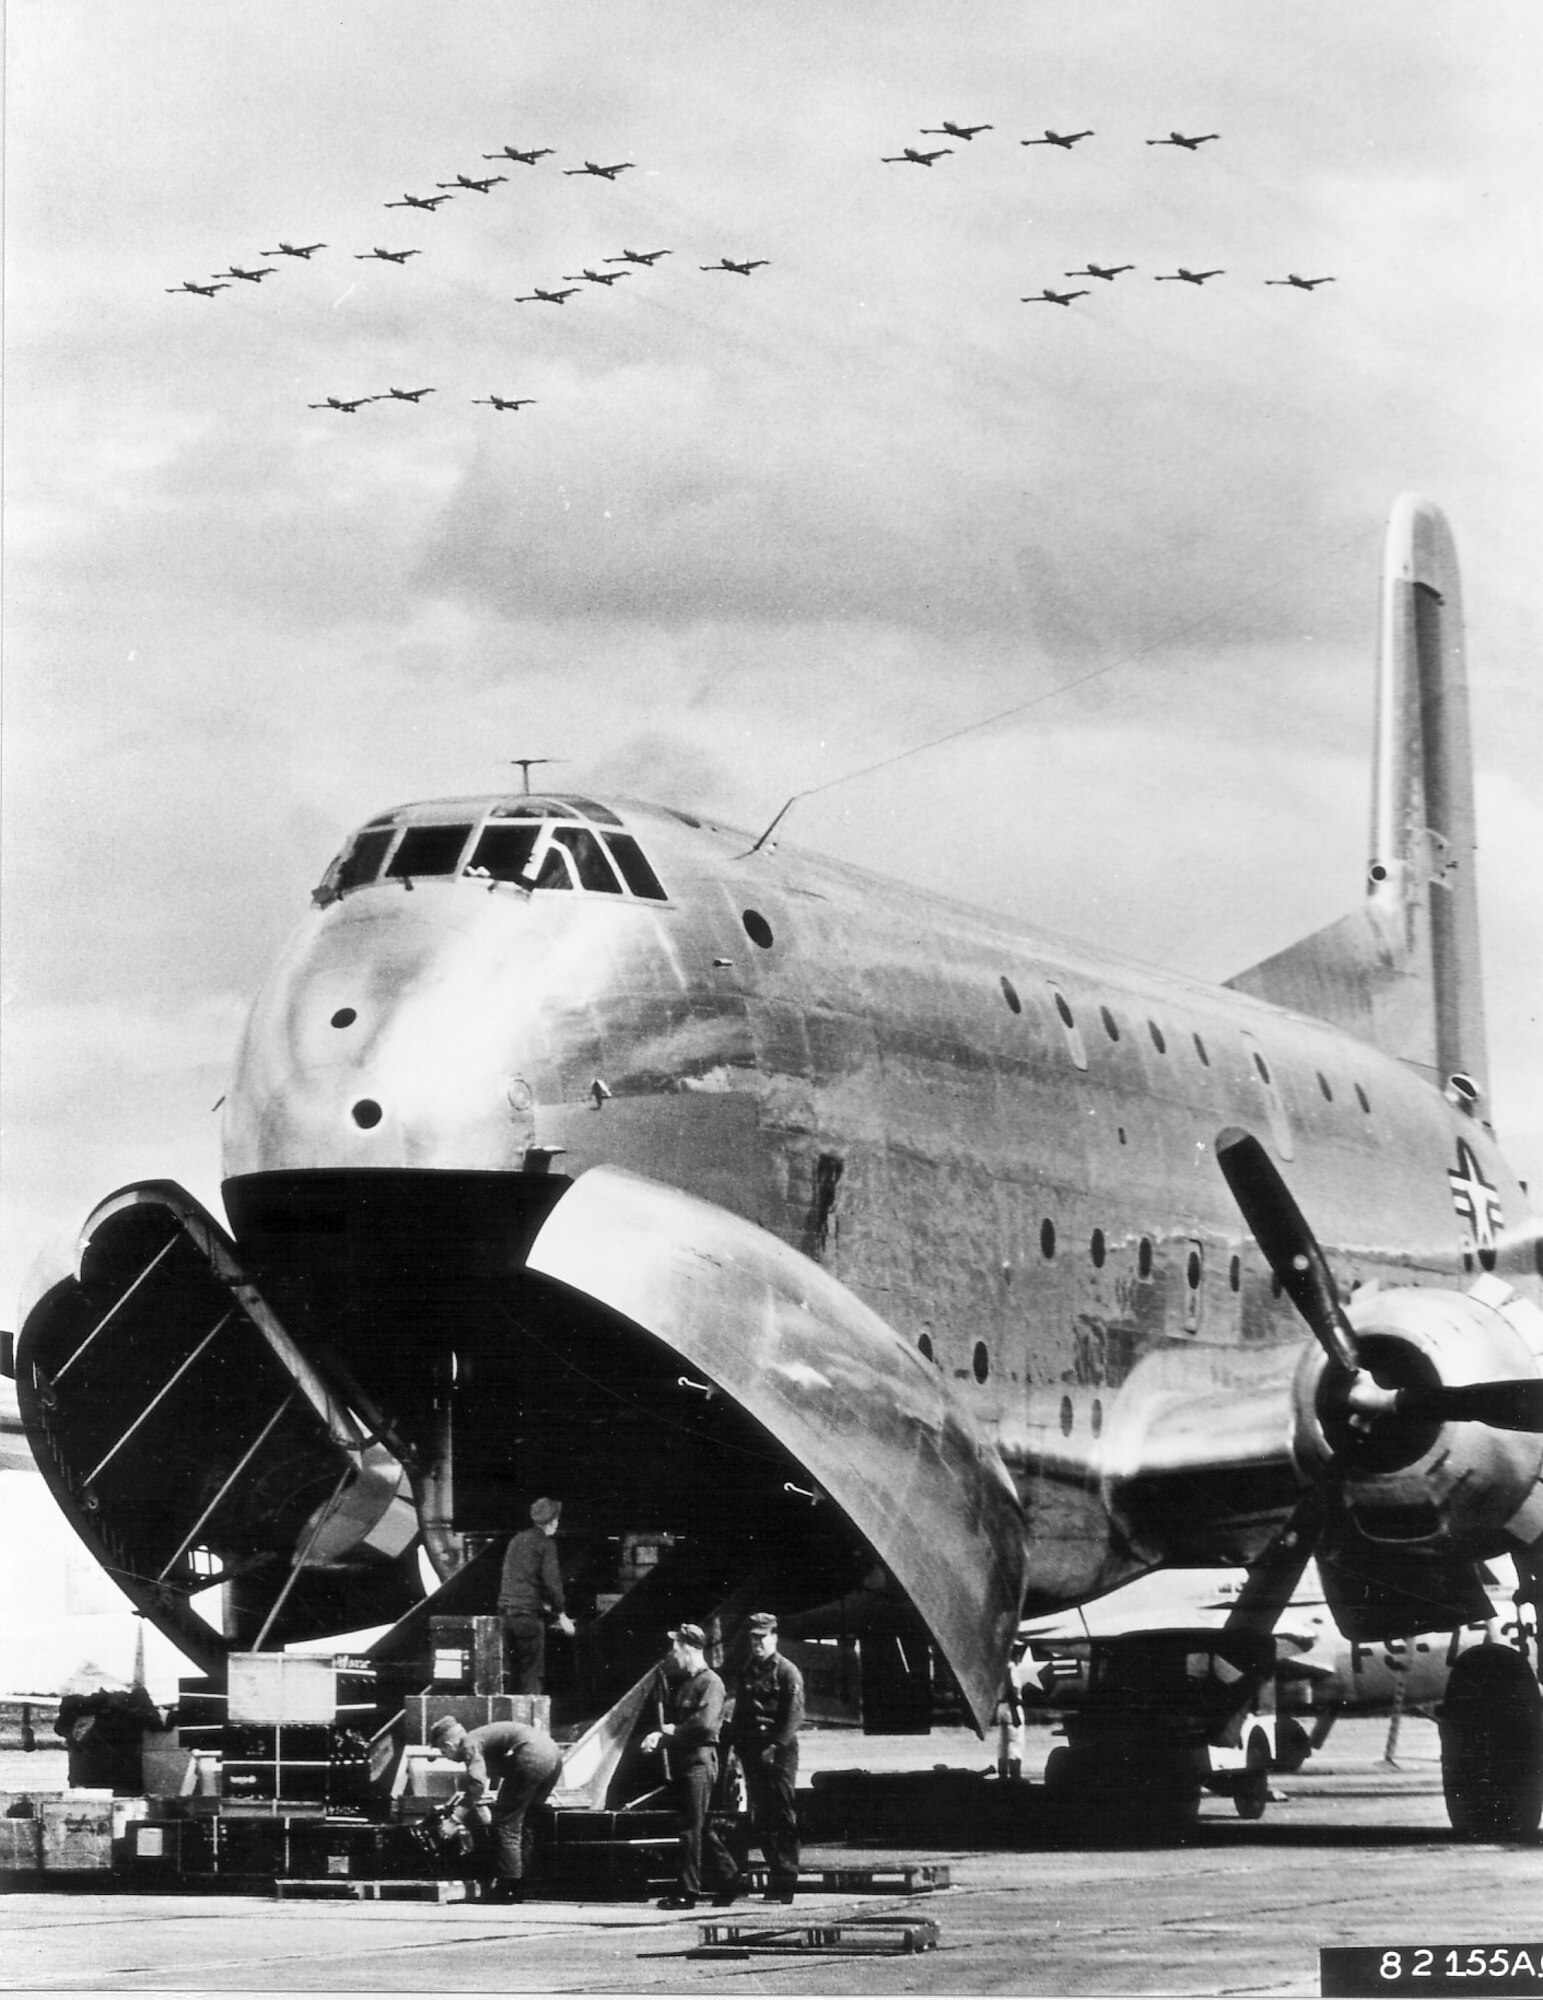 1950s -- Flashing through the sky above a U.S. Air Force C-124 Globemaster, F-84G Thunderjets of the 27th Fighter Escort Wing arrive at a Japan Air Defense Force base in northern Japan after completing a trans-Pacific flight.  The F-84s flew 7,800 miles from their home base to Japan and set a new record for over-water flight by single engine fighter aircraft.  They flew the last 2,575 miles of their trip using in-flight refueling, October 1952. (U.S. Air Force photo)